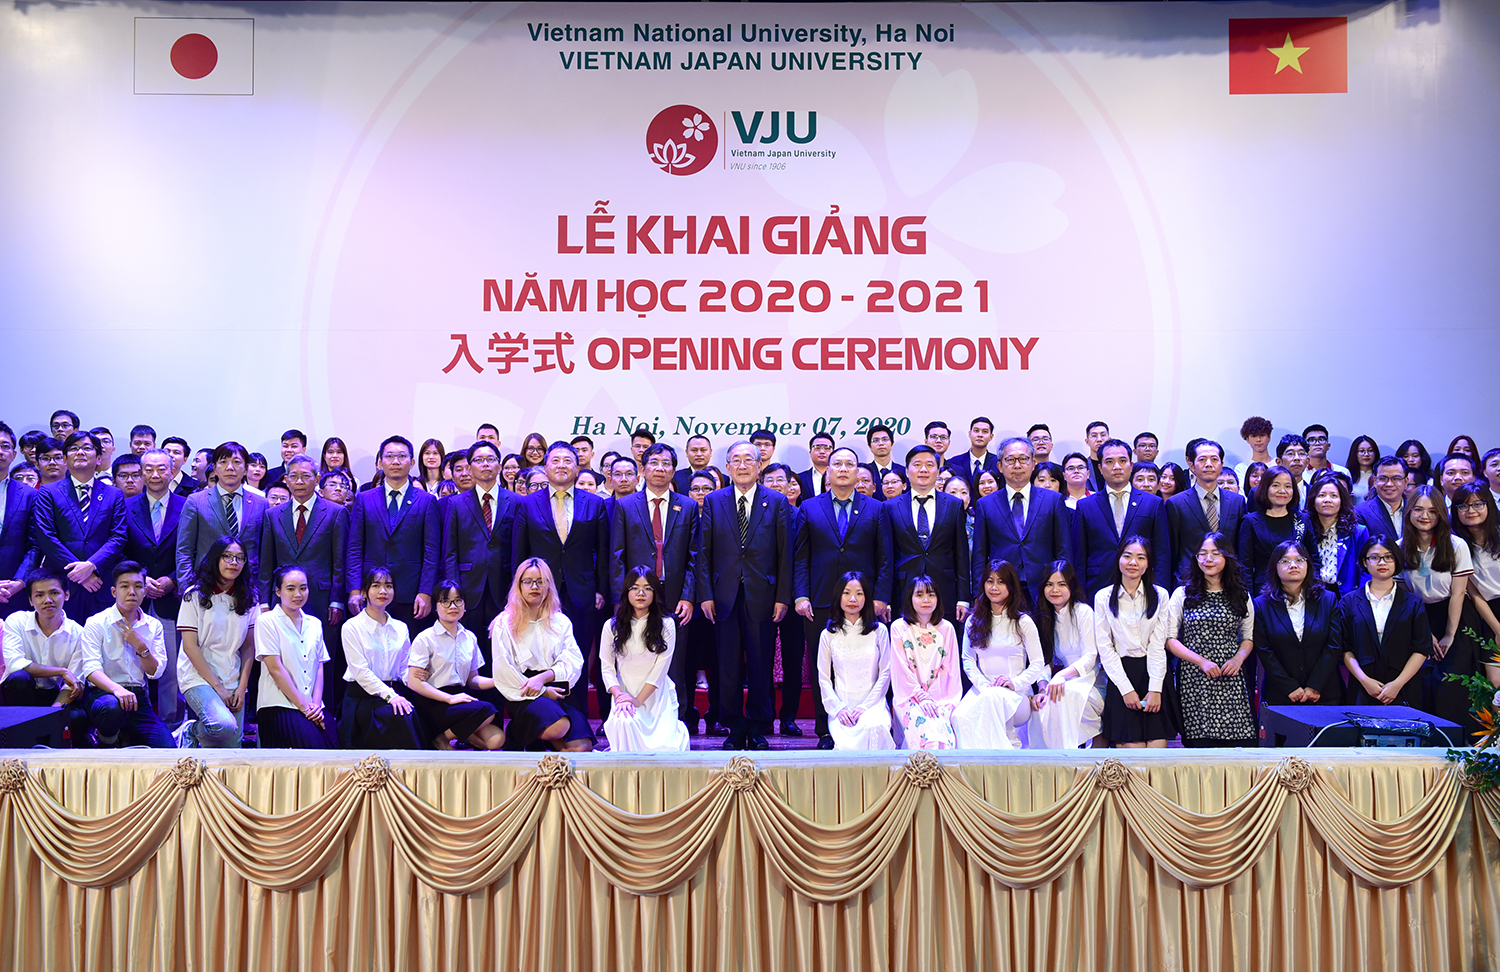 General Director CONINCO attended the opening ceremony the school year 2020 -2021  gave a speech to congratulate the new masters Vietnam Japan University